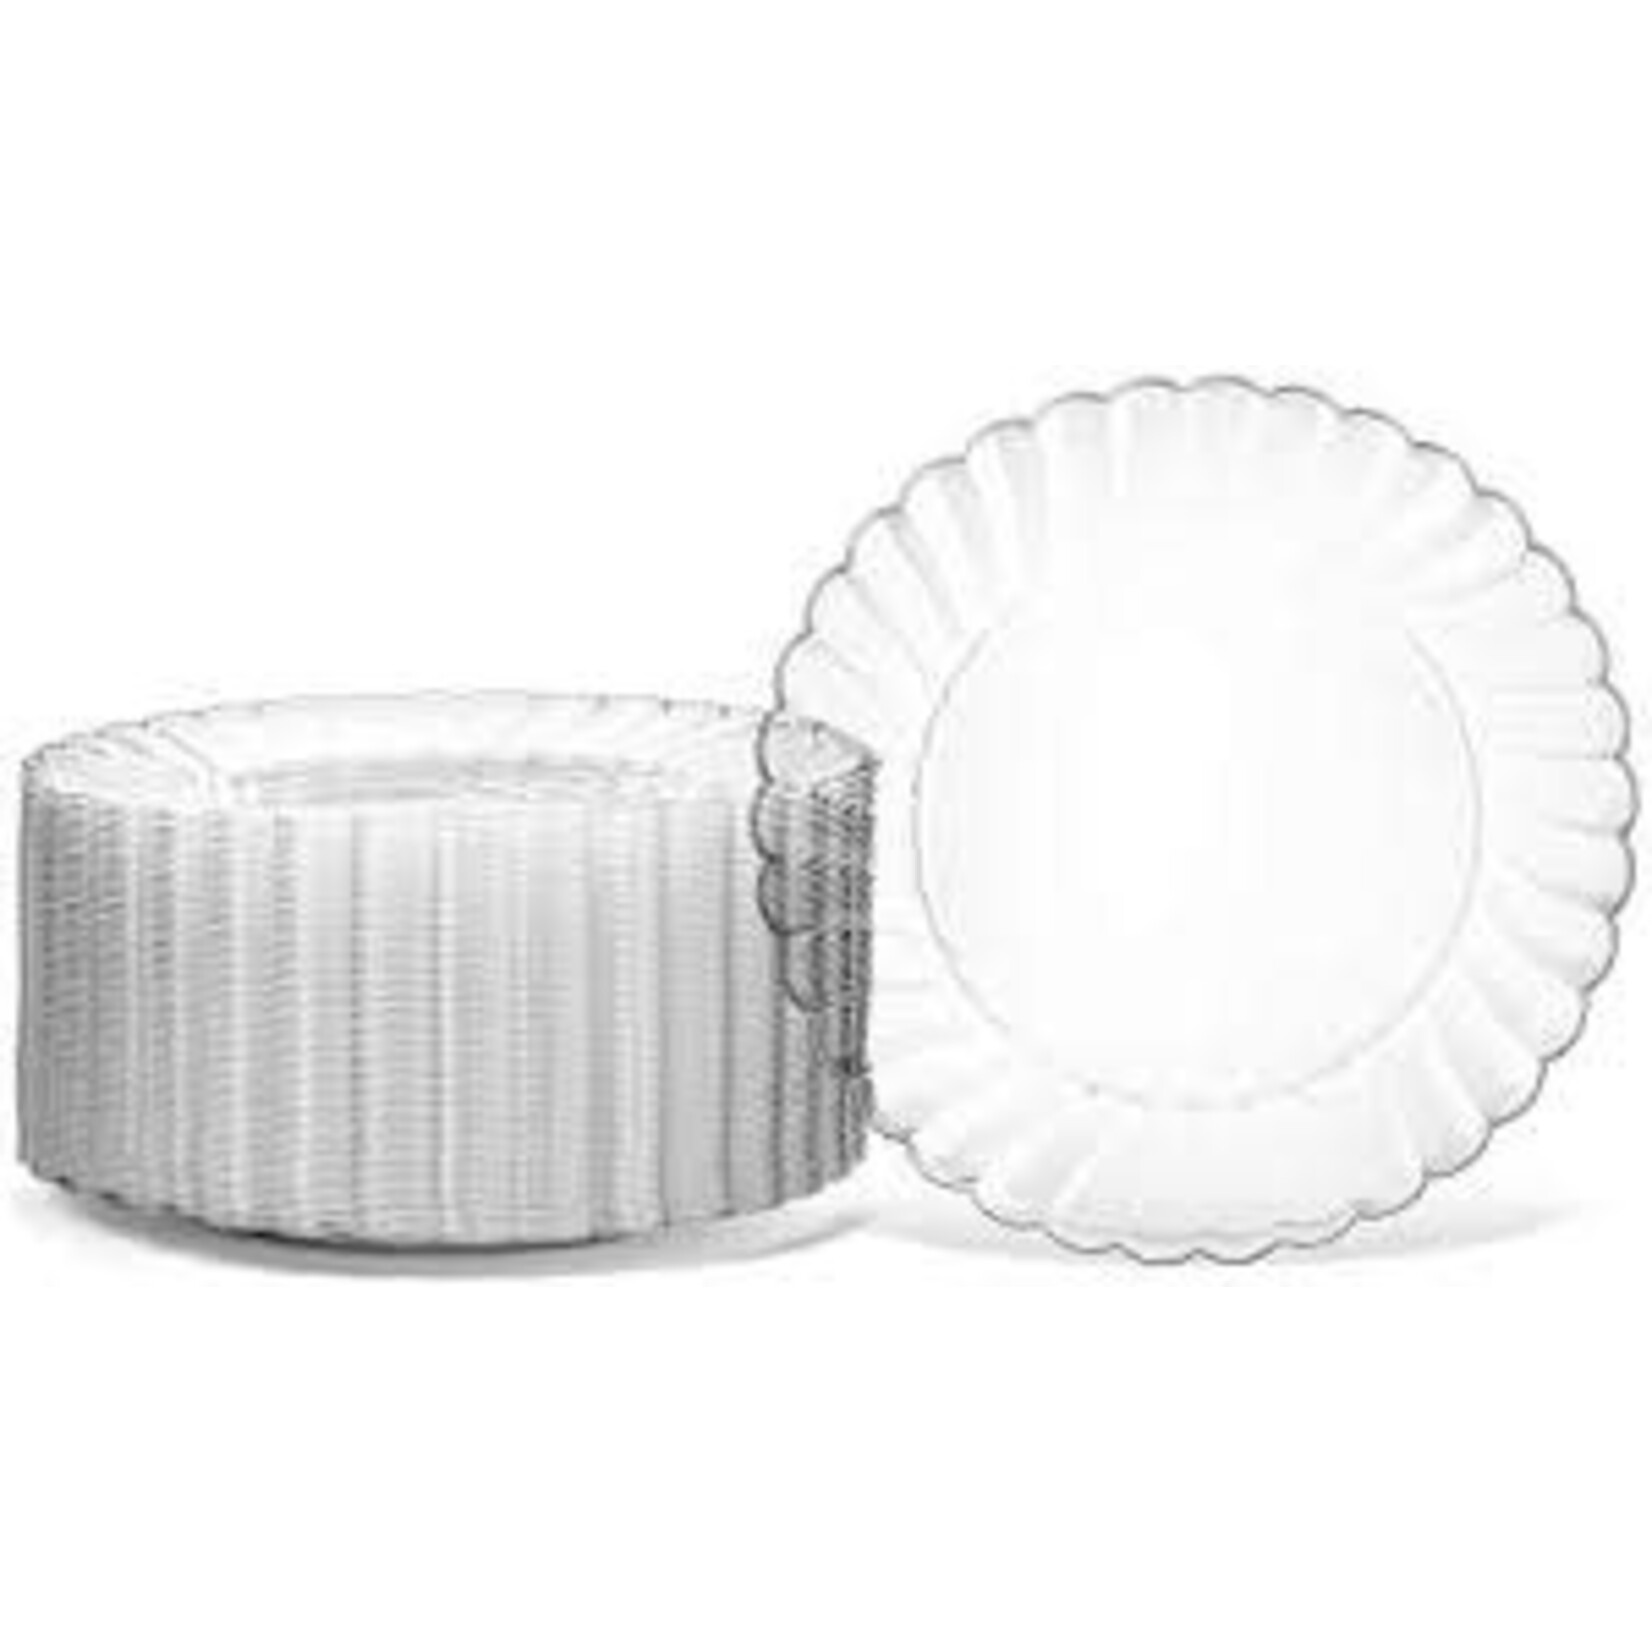 PW2640 9" clear round scalloped disposable plate 24 ct   10 /case